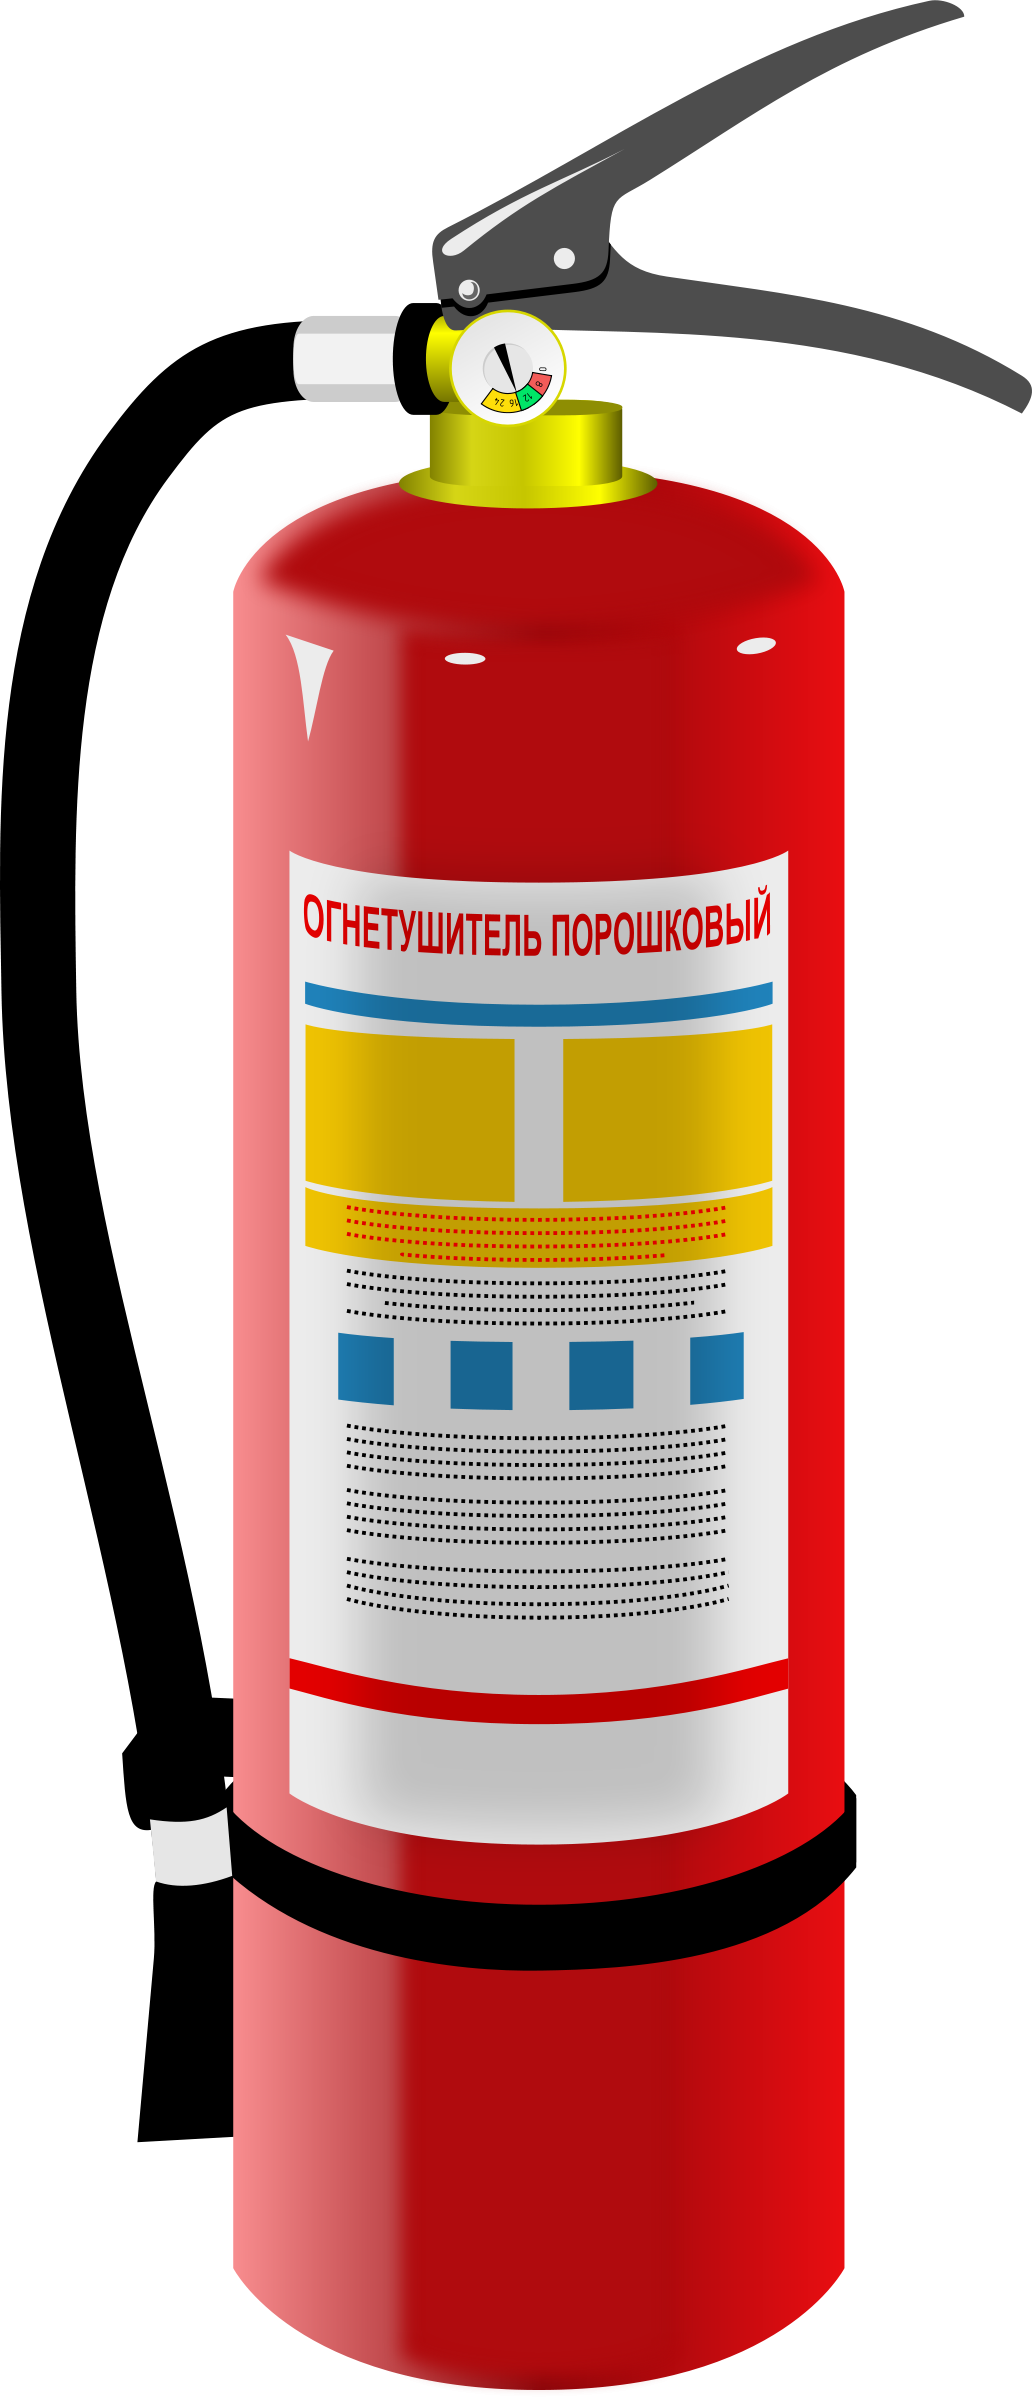 Clipart Of Fire Extinguisher - Cute Fire Extinguisher, Transparent background PNG HD thumbnail